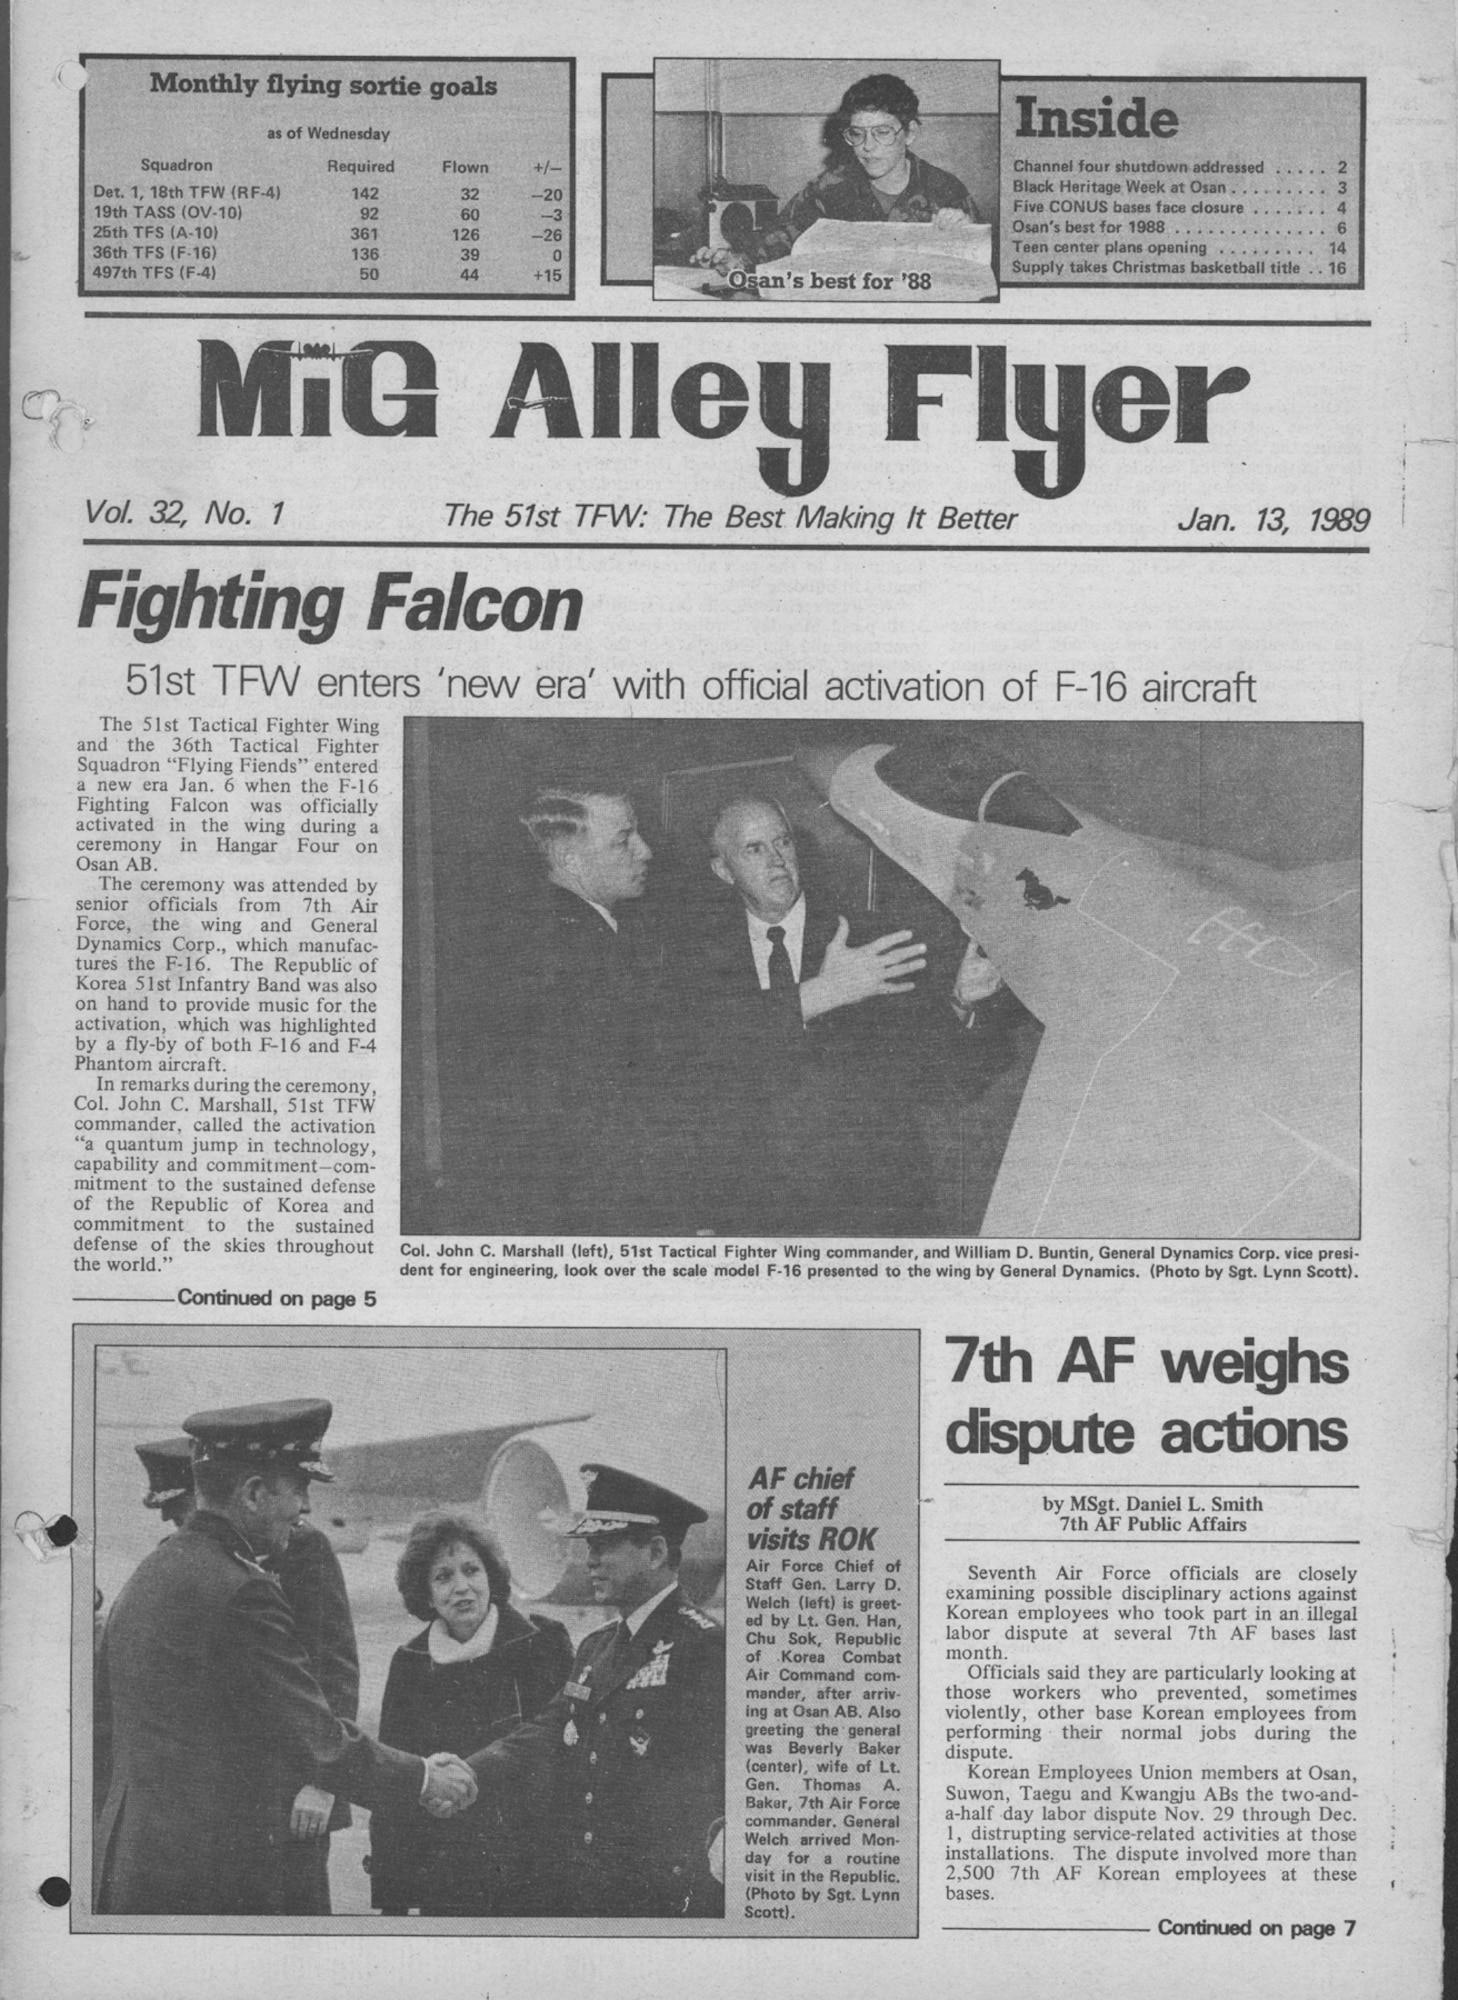 OSAN AIR BASE, Republic of Korea --  This is the front page from the Jan. 13, 1989 edition of the MiG Alley Flyer. Osan's base newspaper has had four names - Thunderjet Express, Sabre Star, The Defender and, starting in 1982, the MiG Alley Flyer.